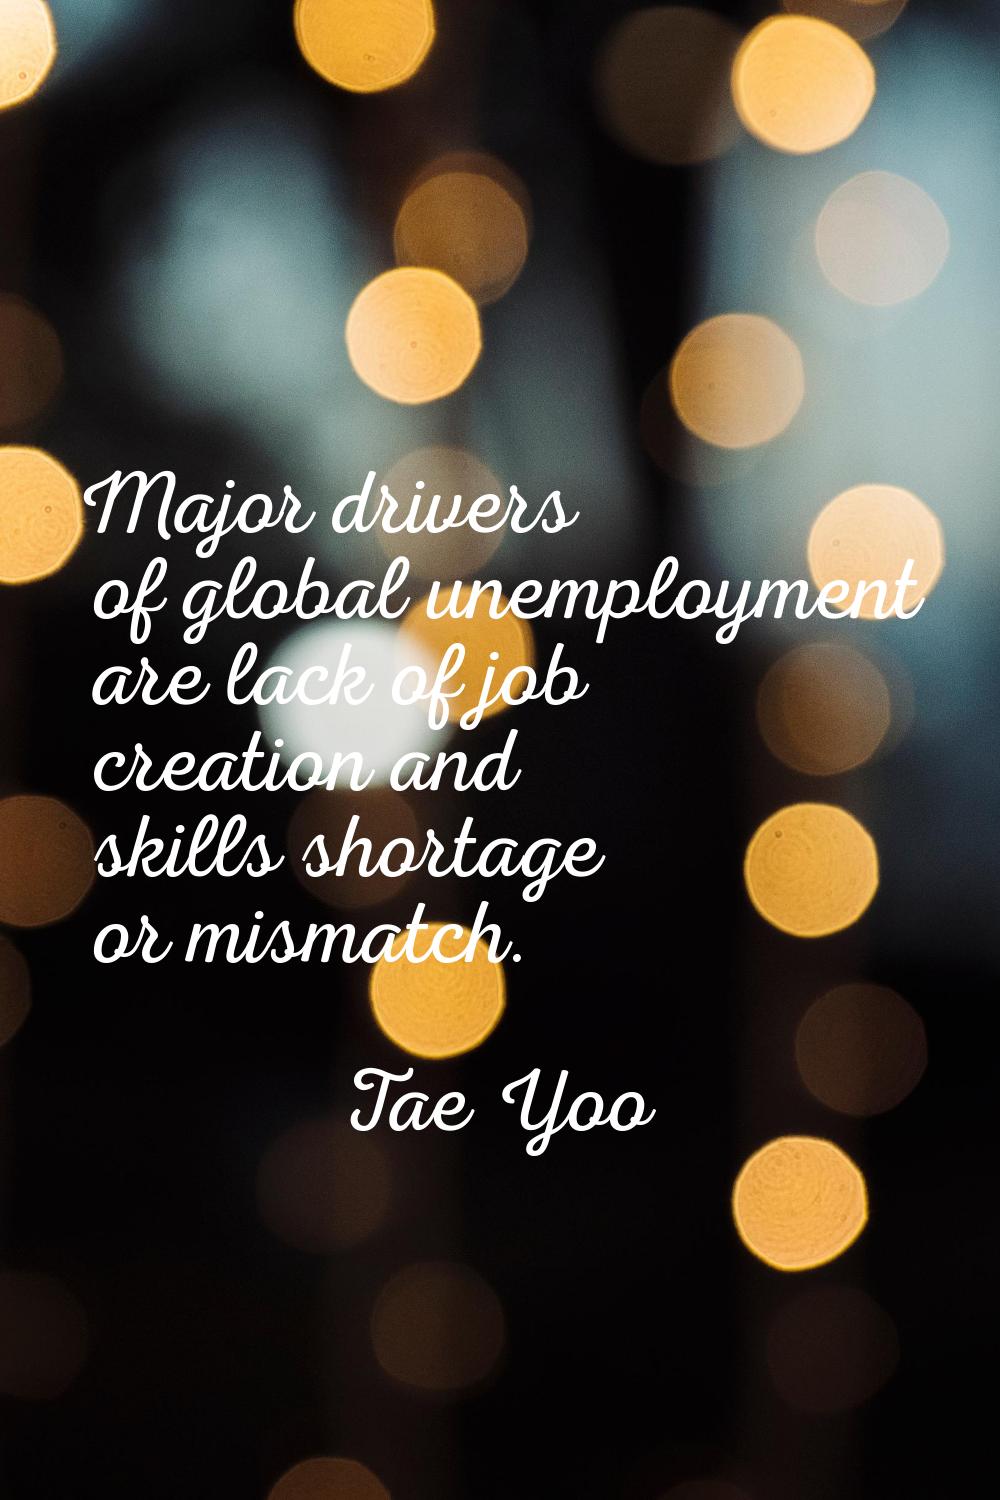 Major drivers of global unemployment are lack of job creation and skills shortage or mismatch.